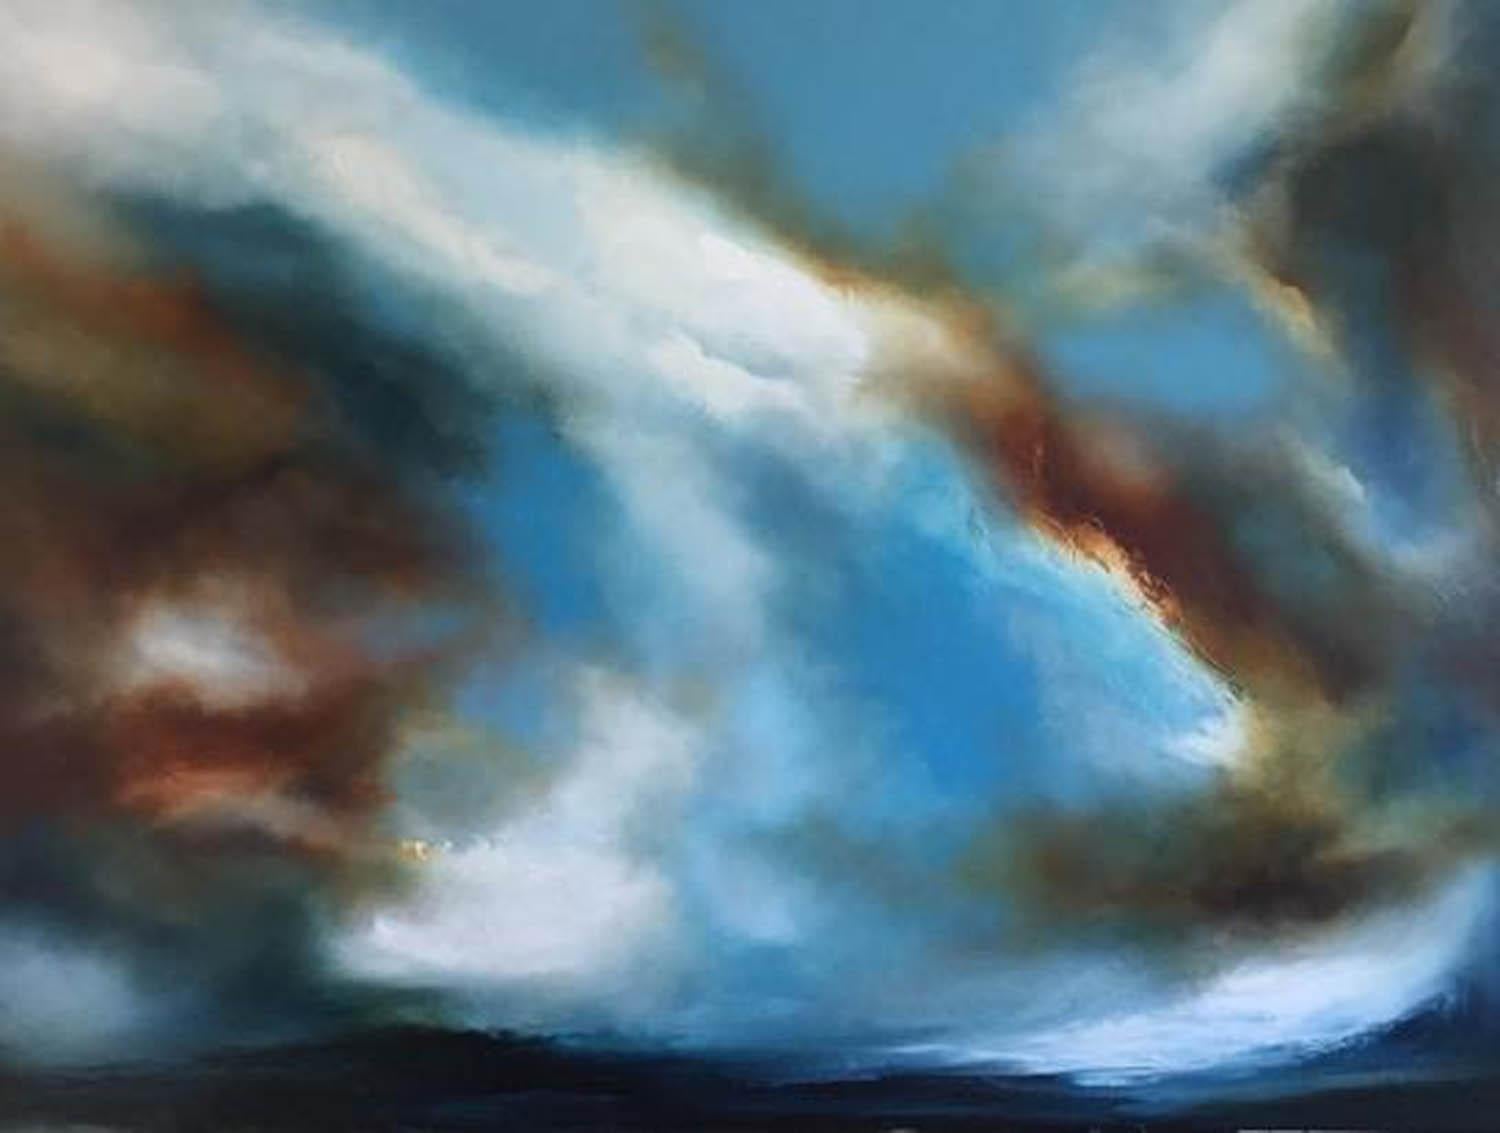 Calling of the Sea is an original oil on canvas seascape painting by Helen Langfield.
It is painted on a boxed canvas, with painted sides, in a block colour to enhance the painting and give a highly contemporary finish.
It is signed by Helen